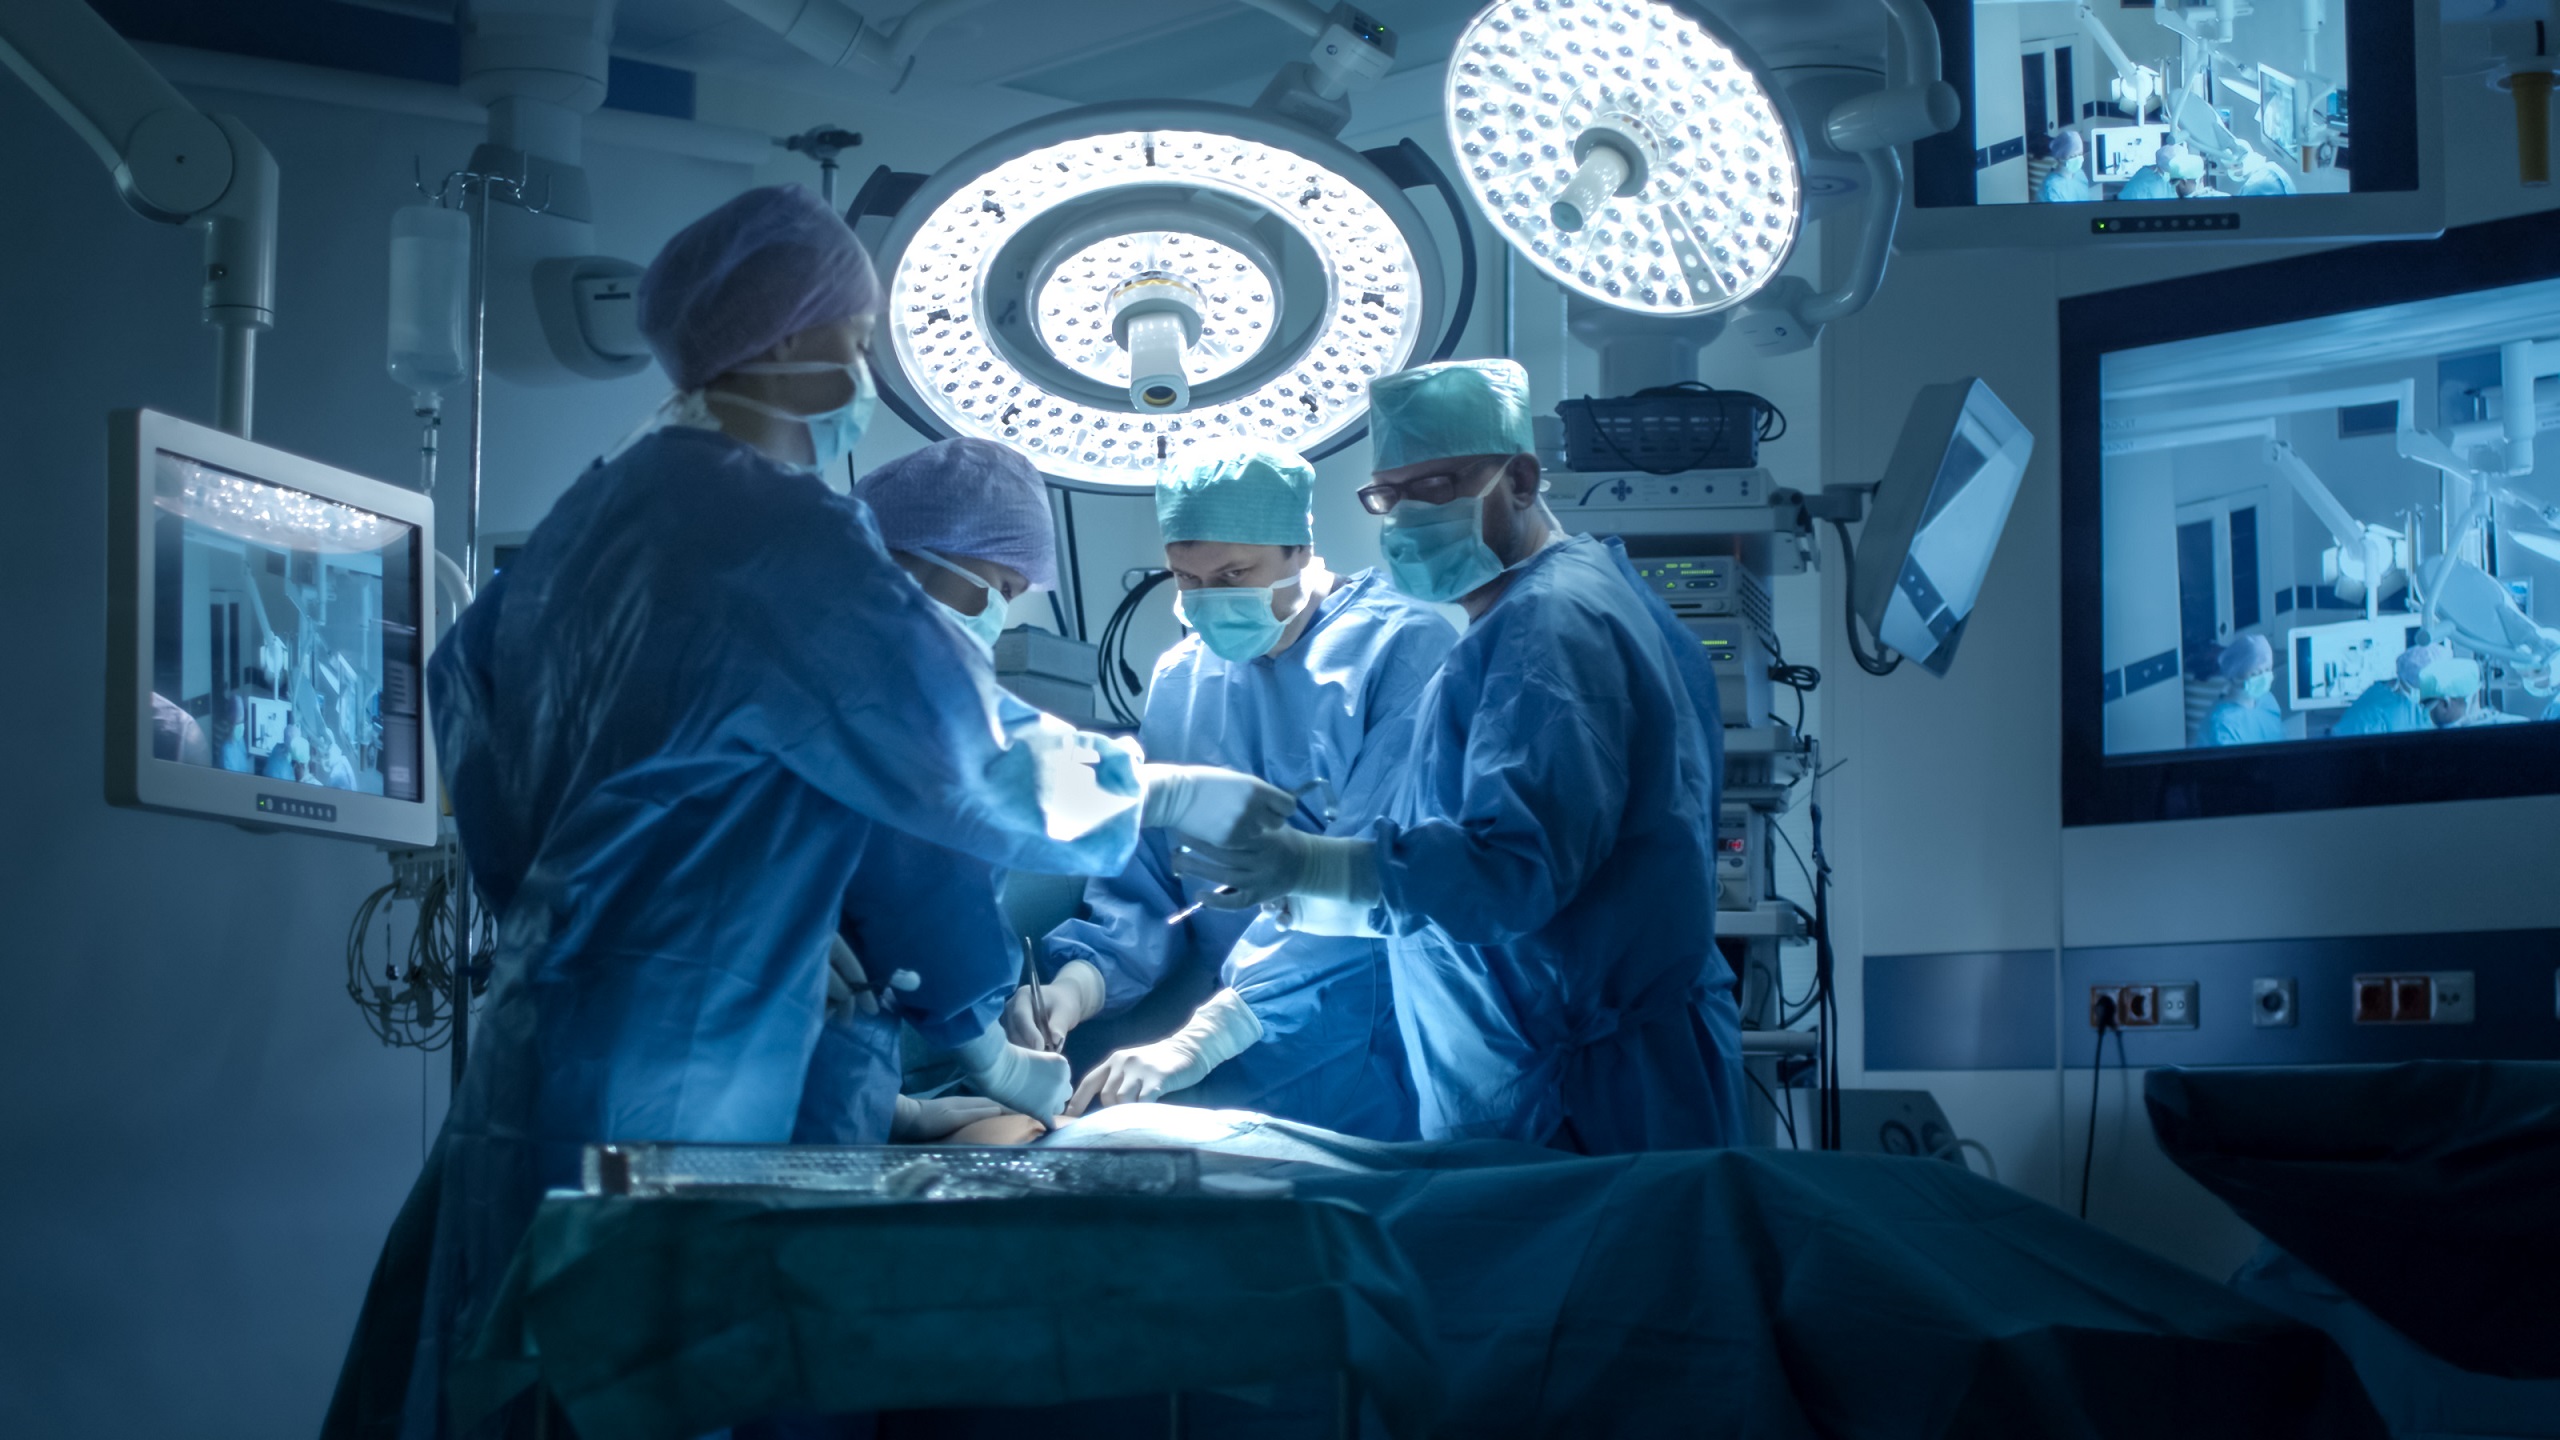 Device Companies will Drive Surgery Automation to Increase Elective Procedu...